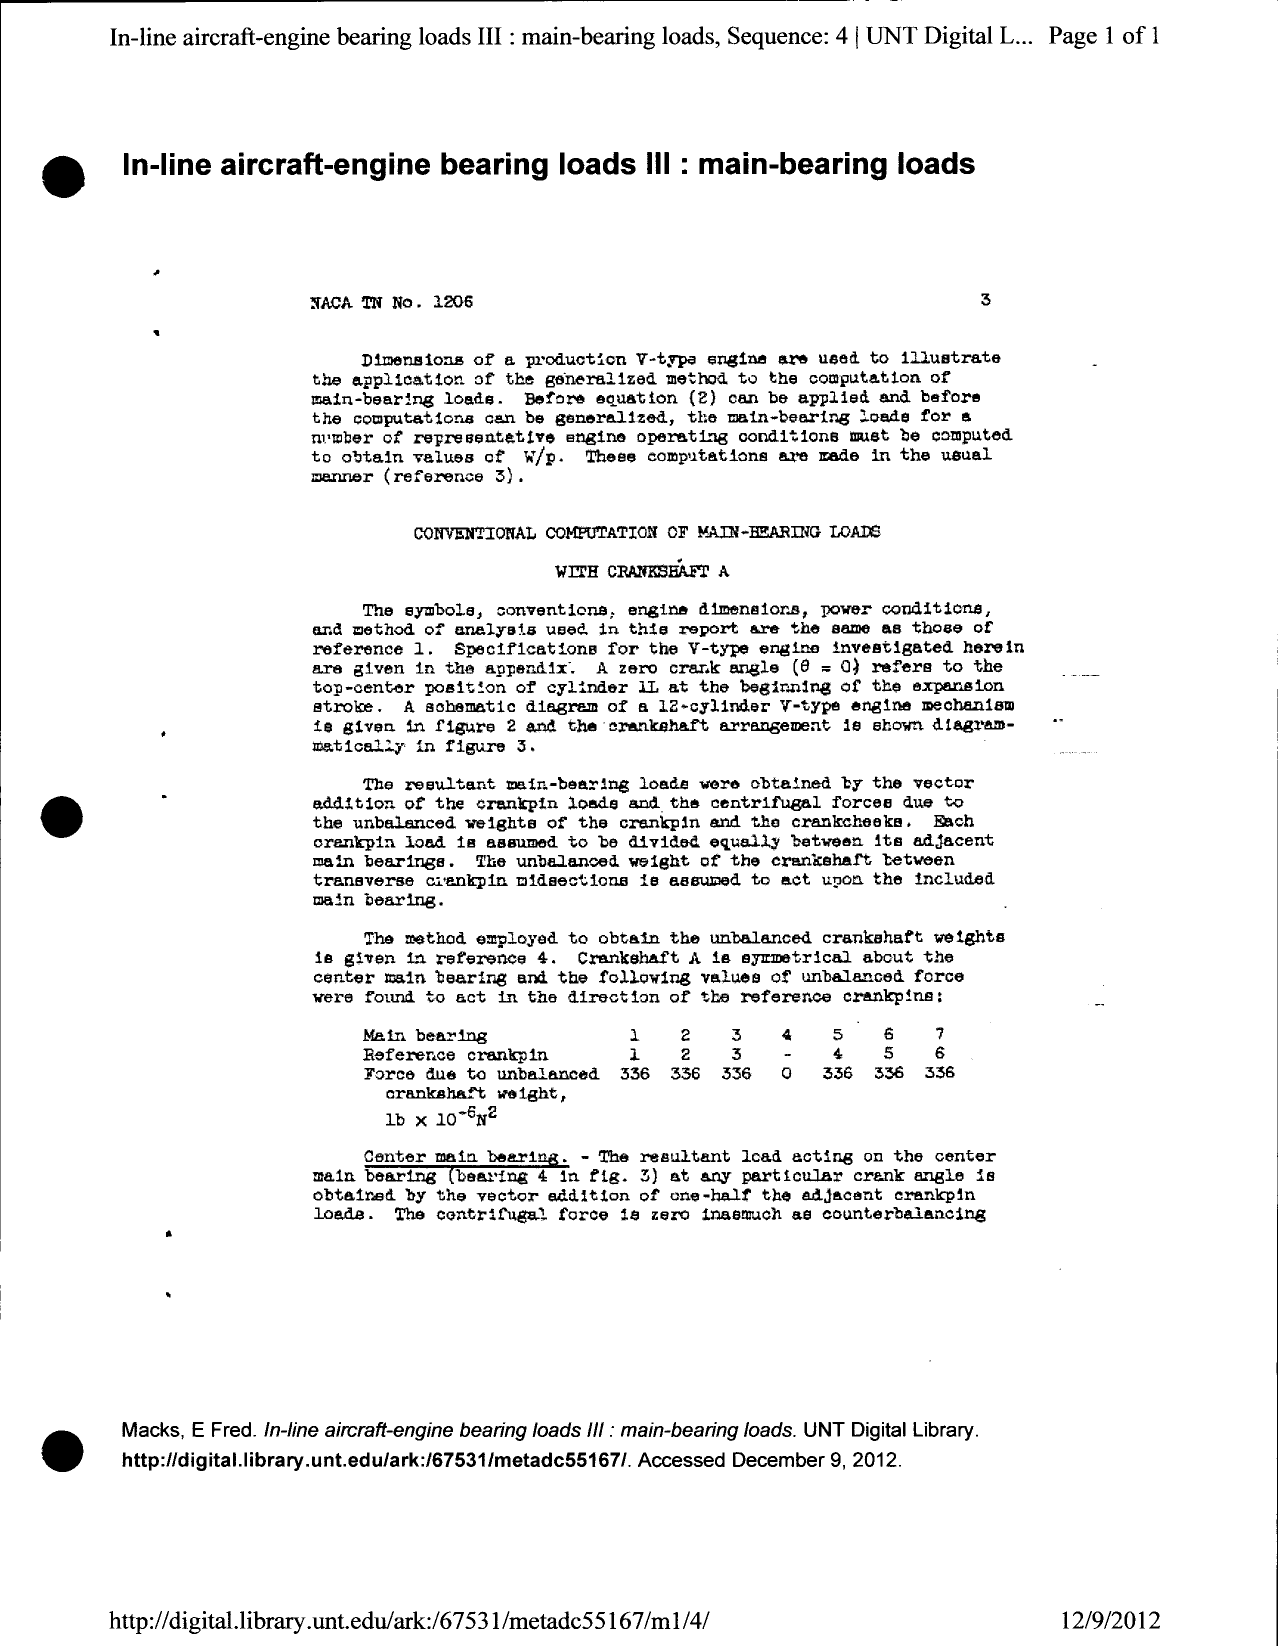 Sample page 4 from AirCorps Library document: In-Line Aircraft-Engine Bearing Loads